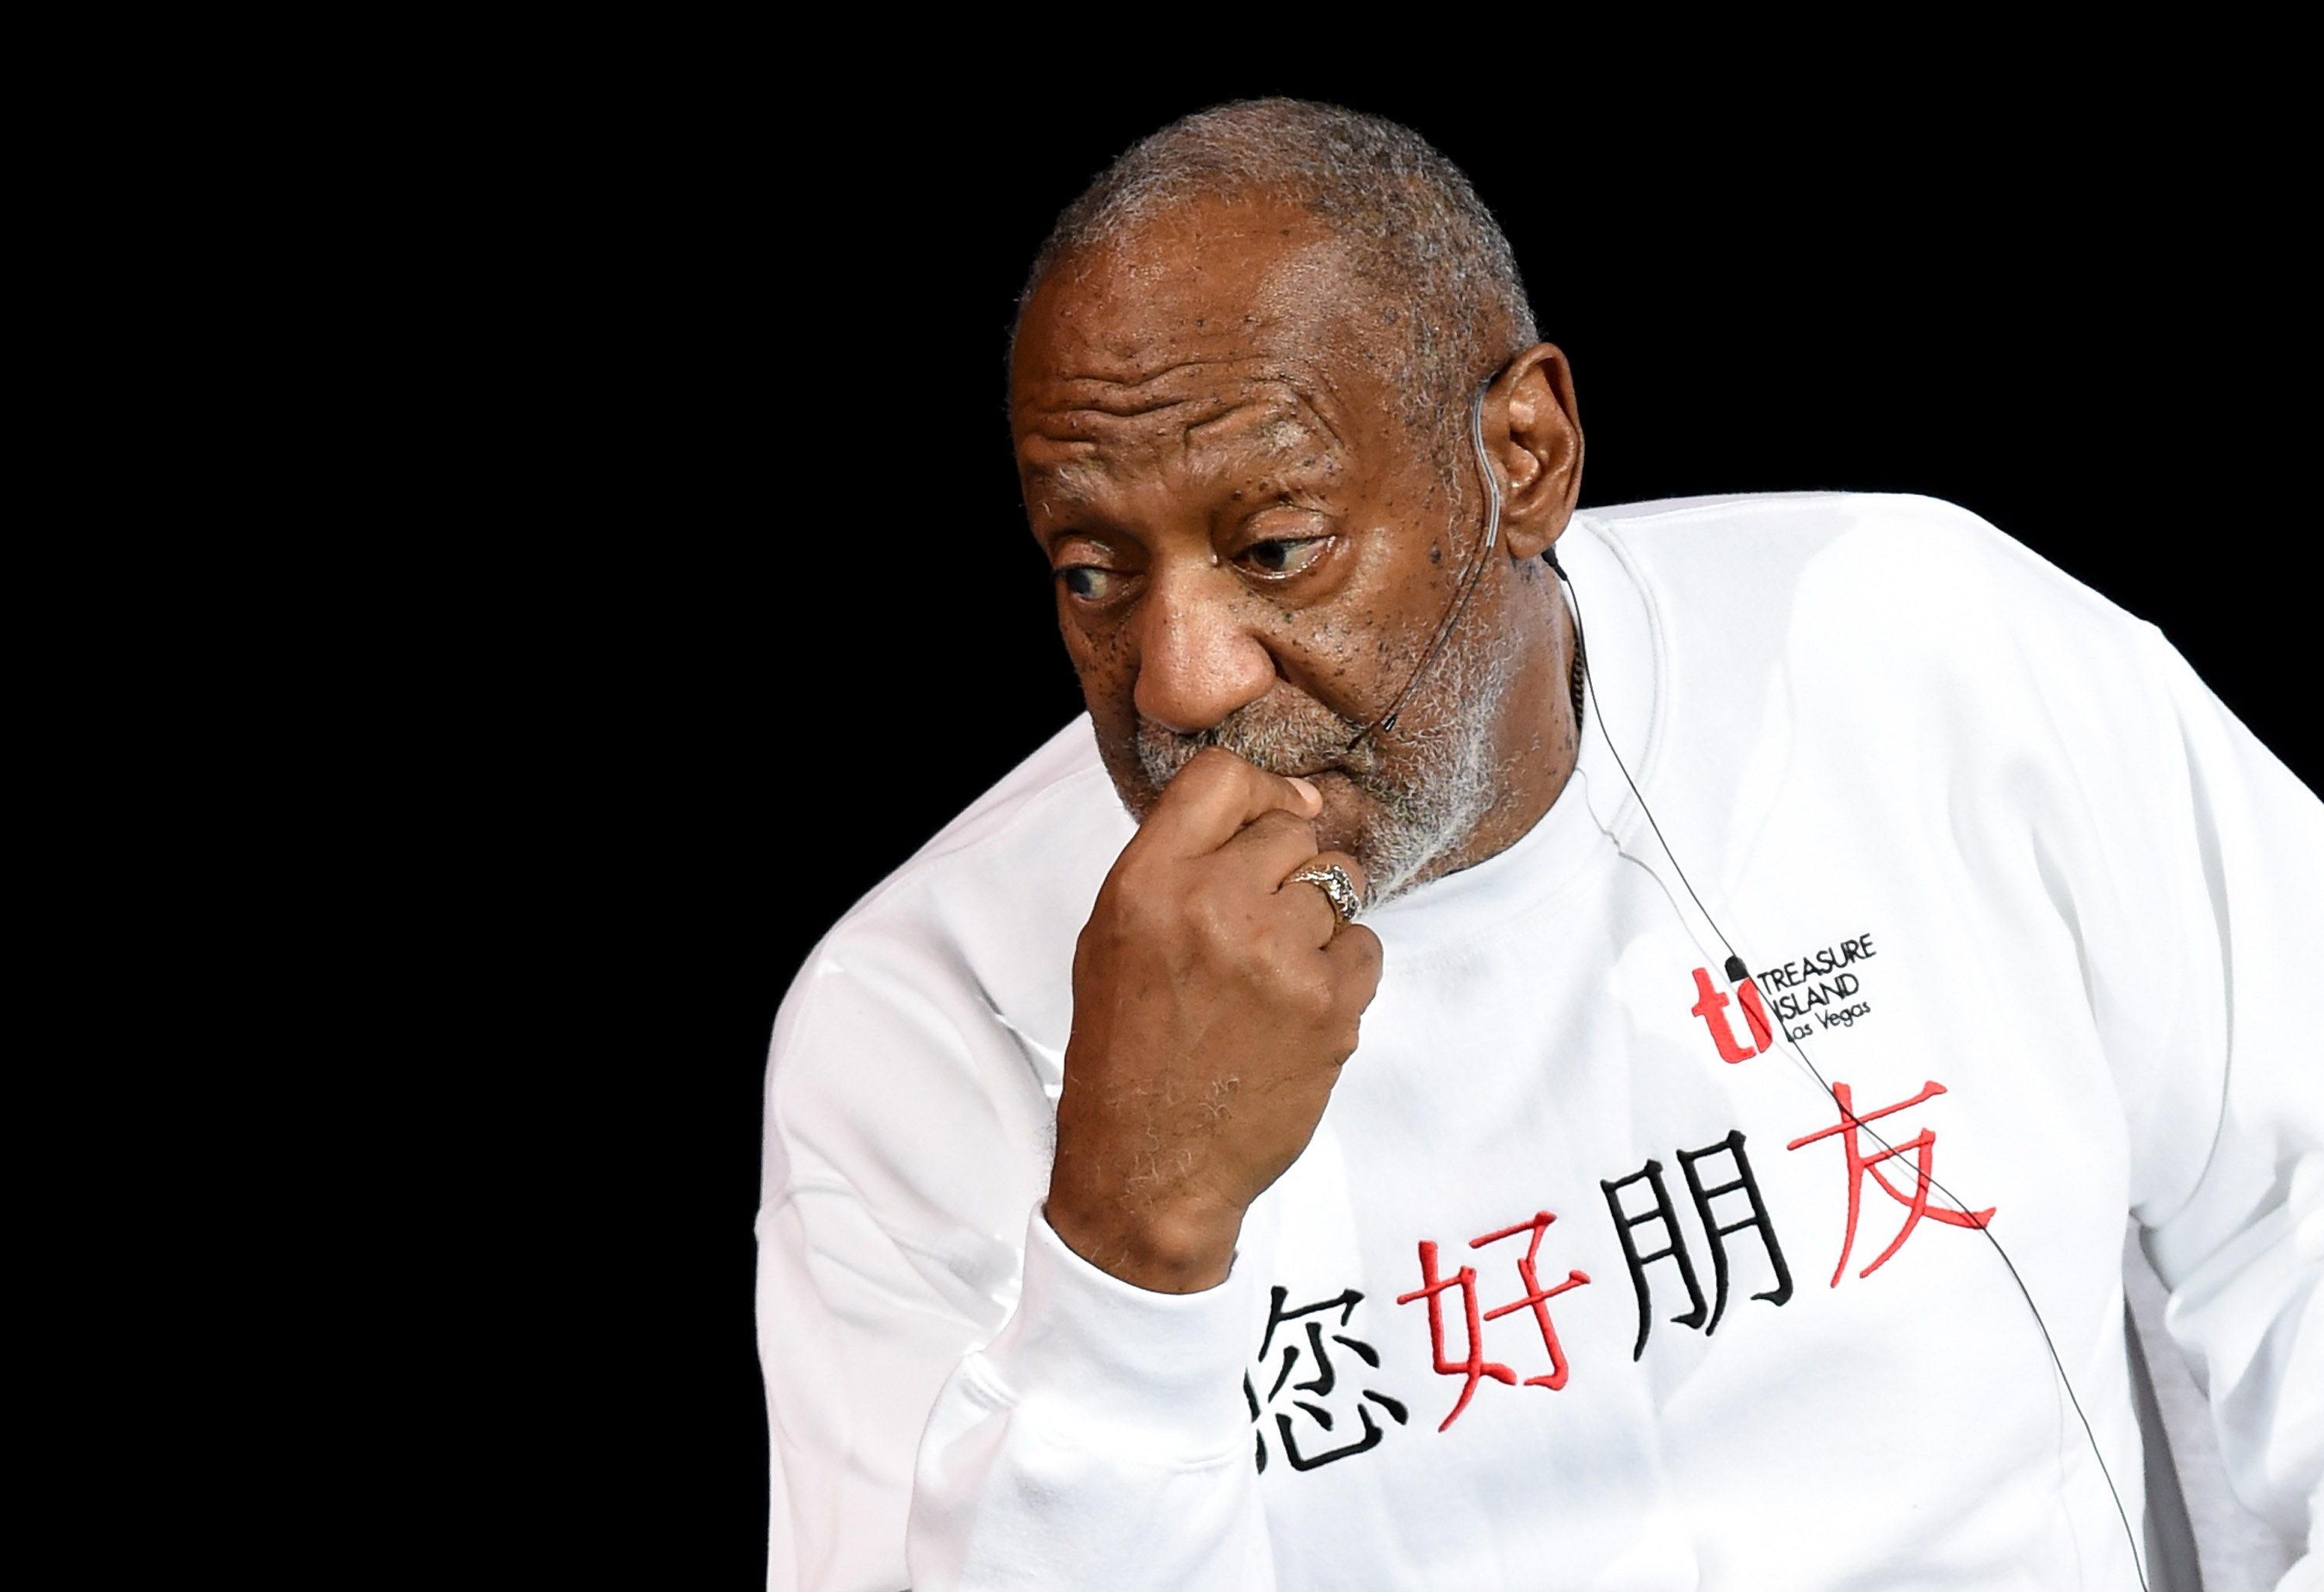 Bill Cosby performs at the Treasure Island Hotel and Casino on Sept. 26, 2014 in Las Vegas. (Ethan Miller—Getty Images)